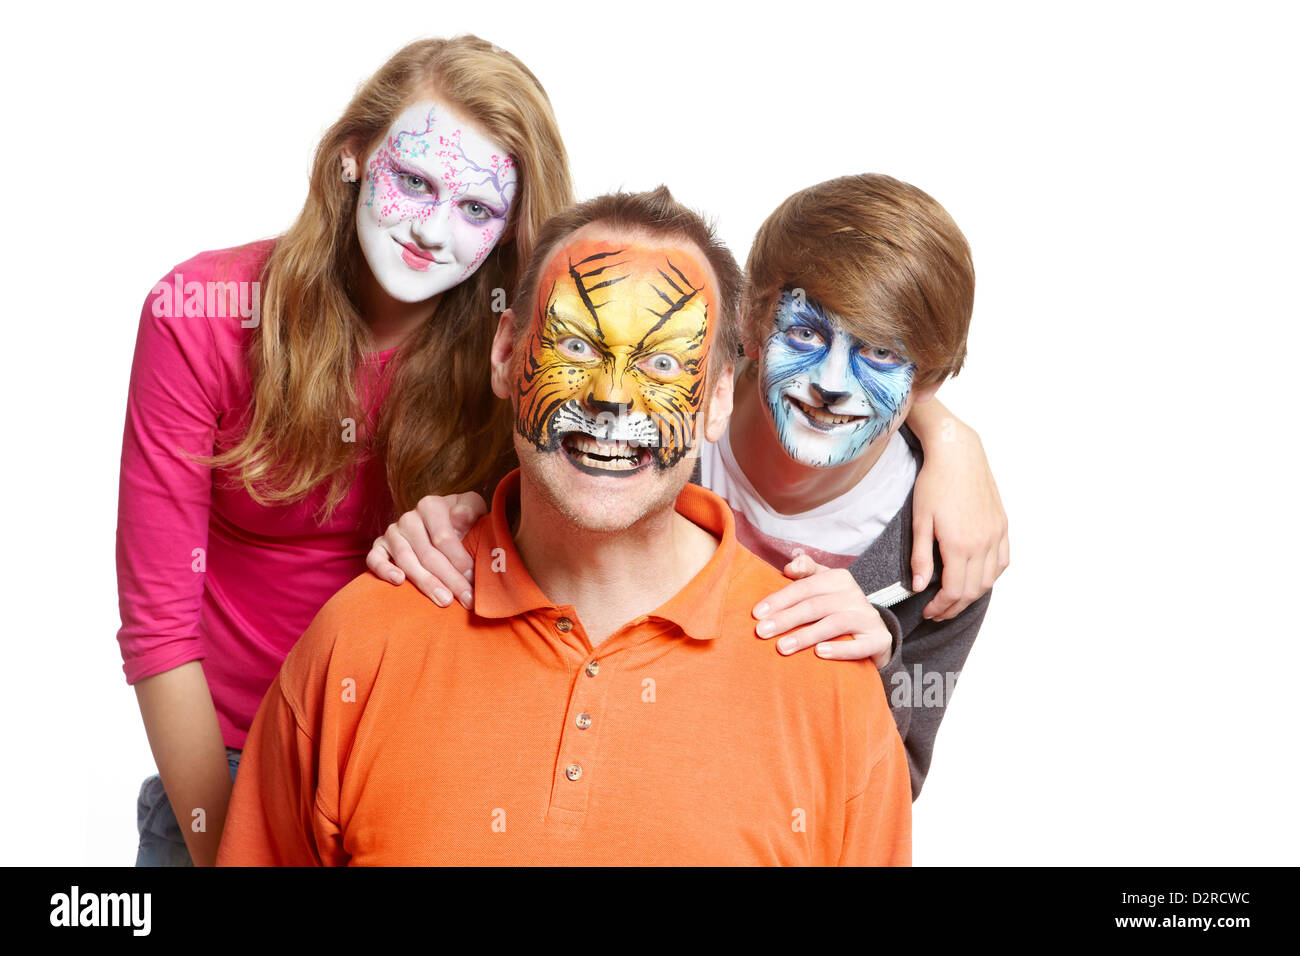 Group of people with face painting geisha girl wolf and tiger smiling on white background Stock Photo